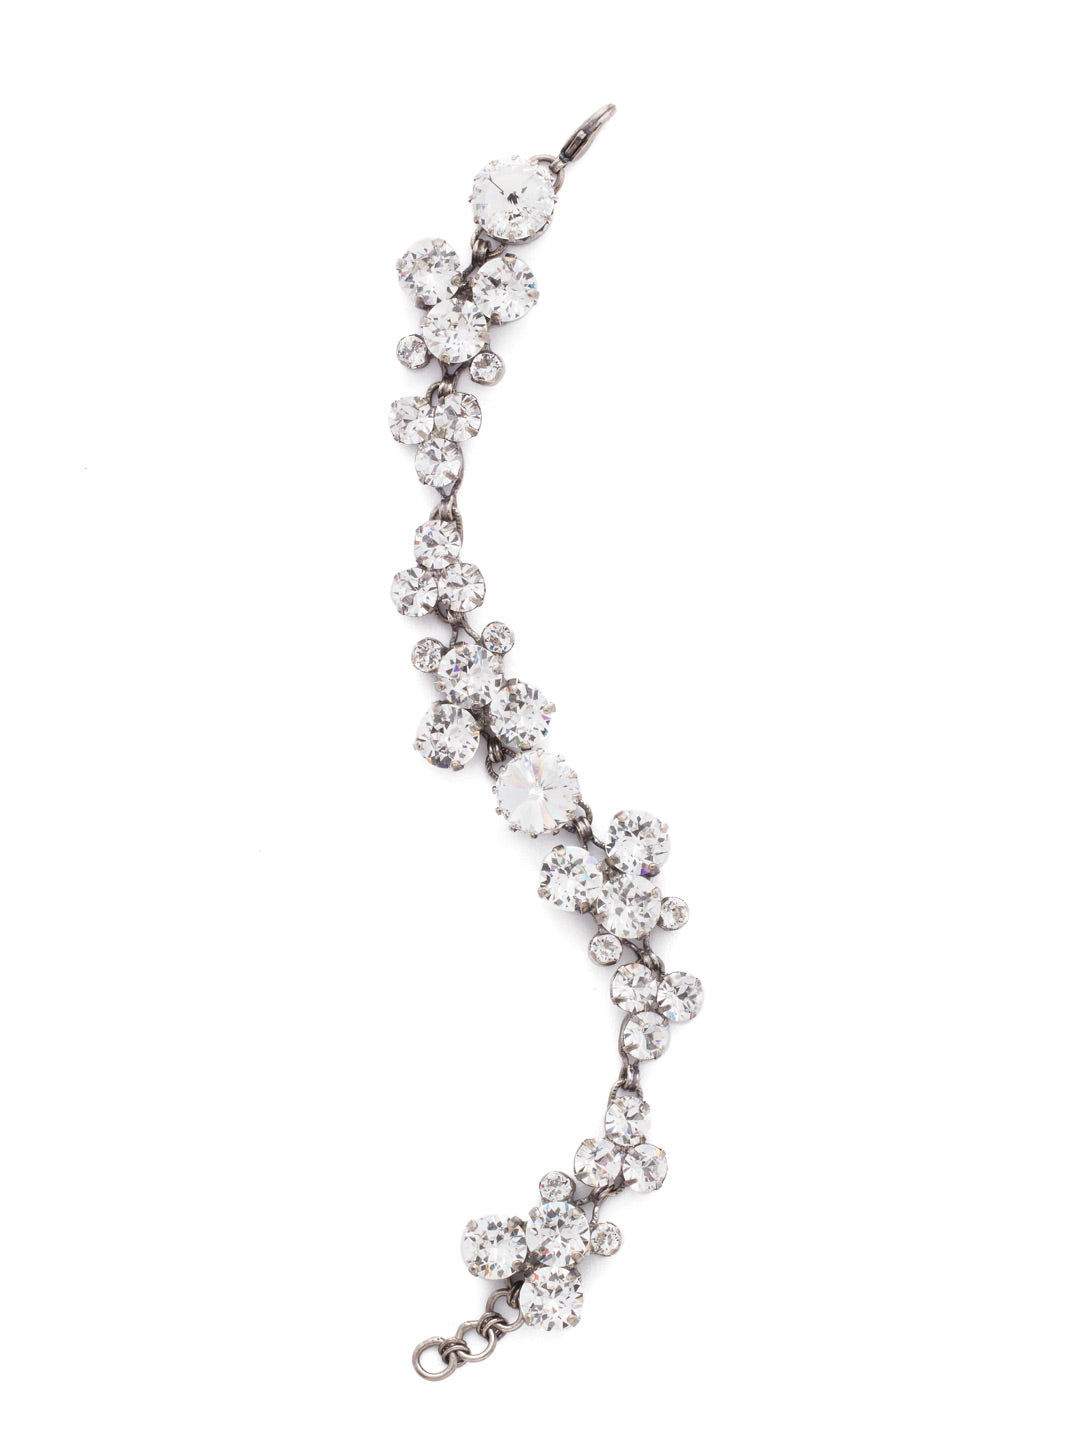 Well-Rounded Tennis Bracelet - BDH24ASCRY